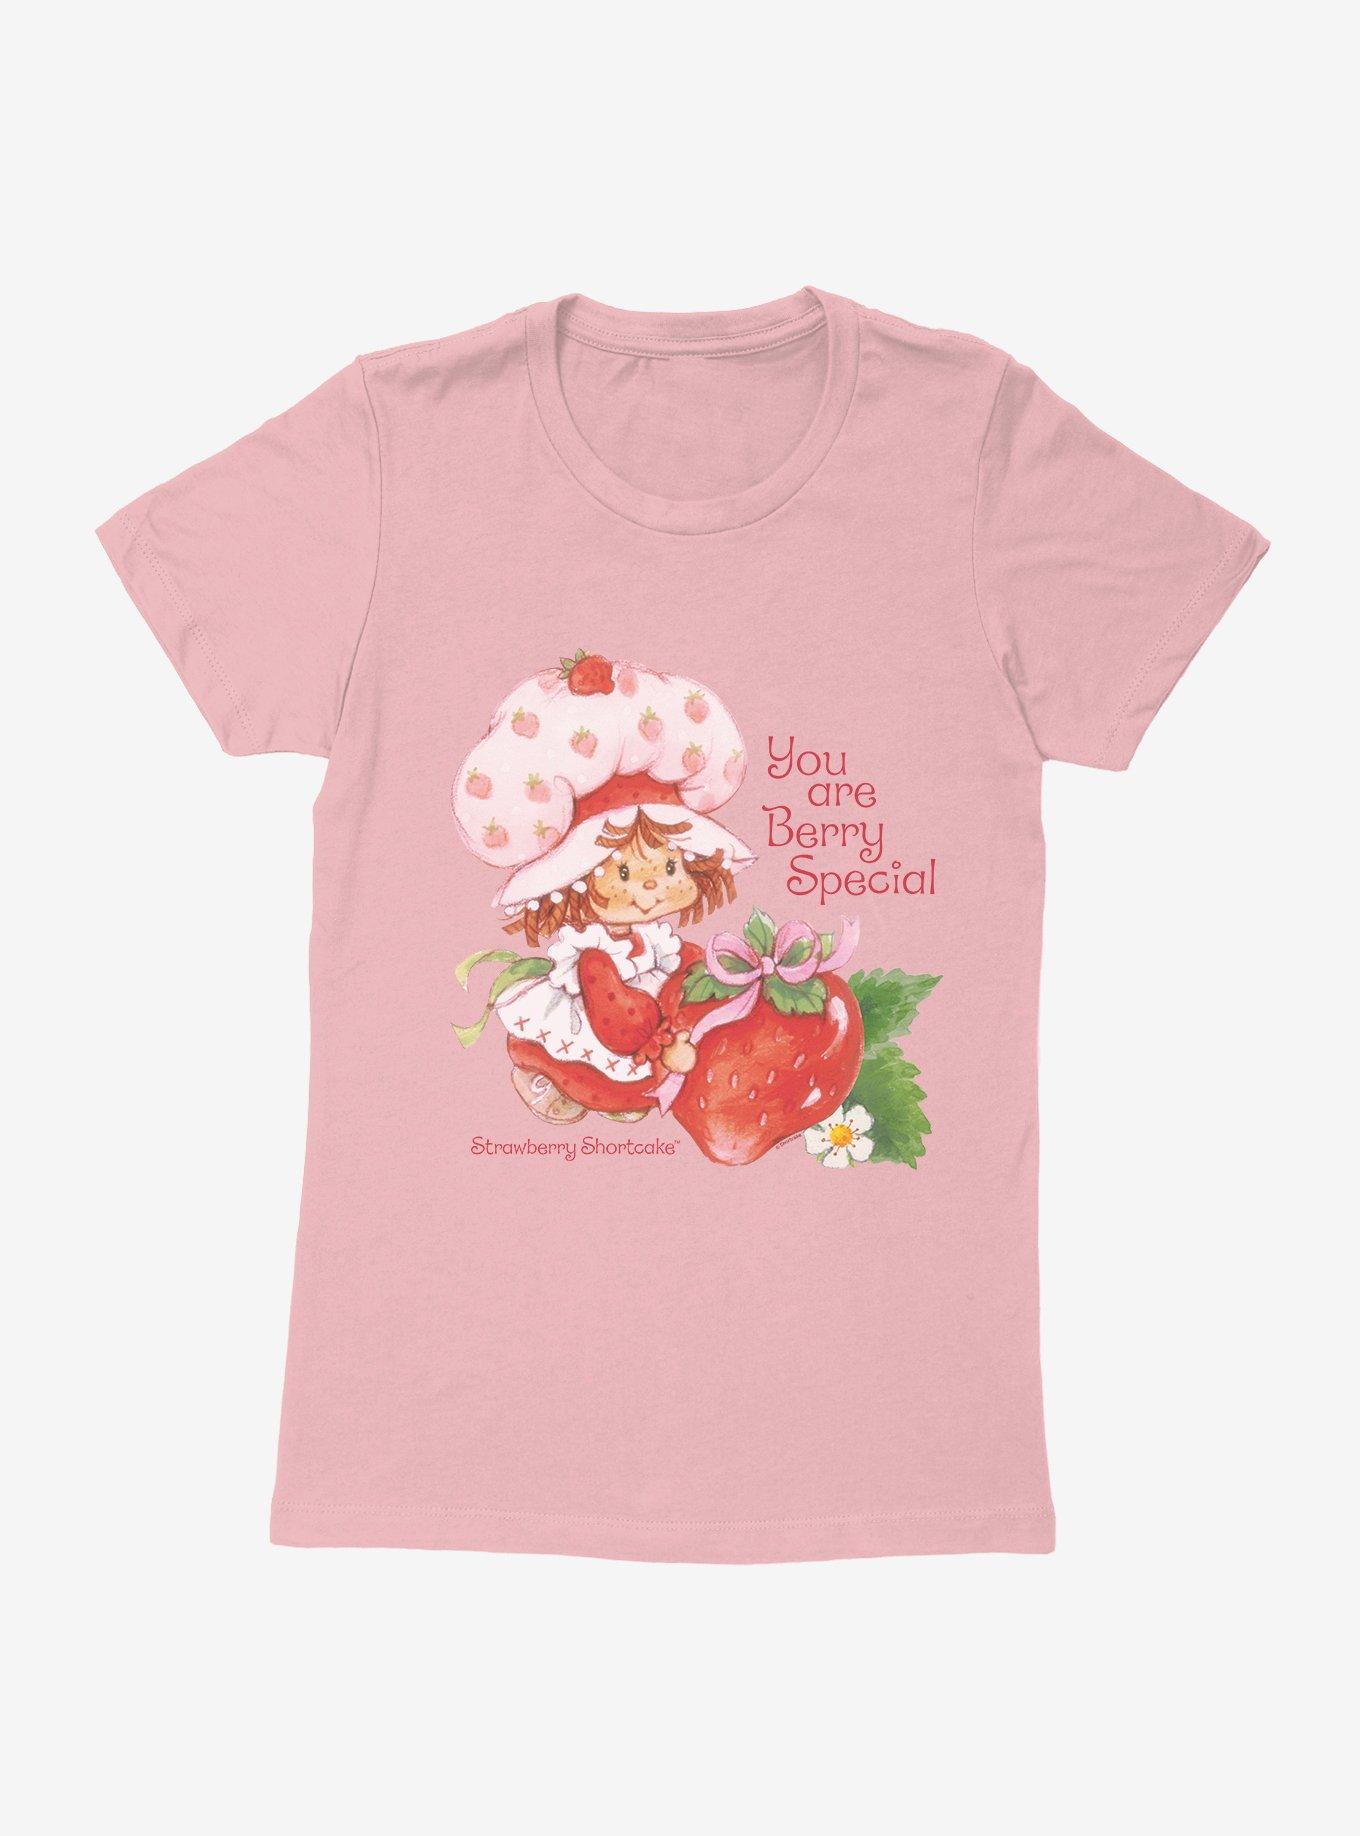 Strawberry Shortcake You Are Berry Special Womens T-Shirt, LIGHT PINK, hi-res